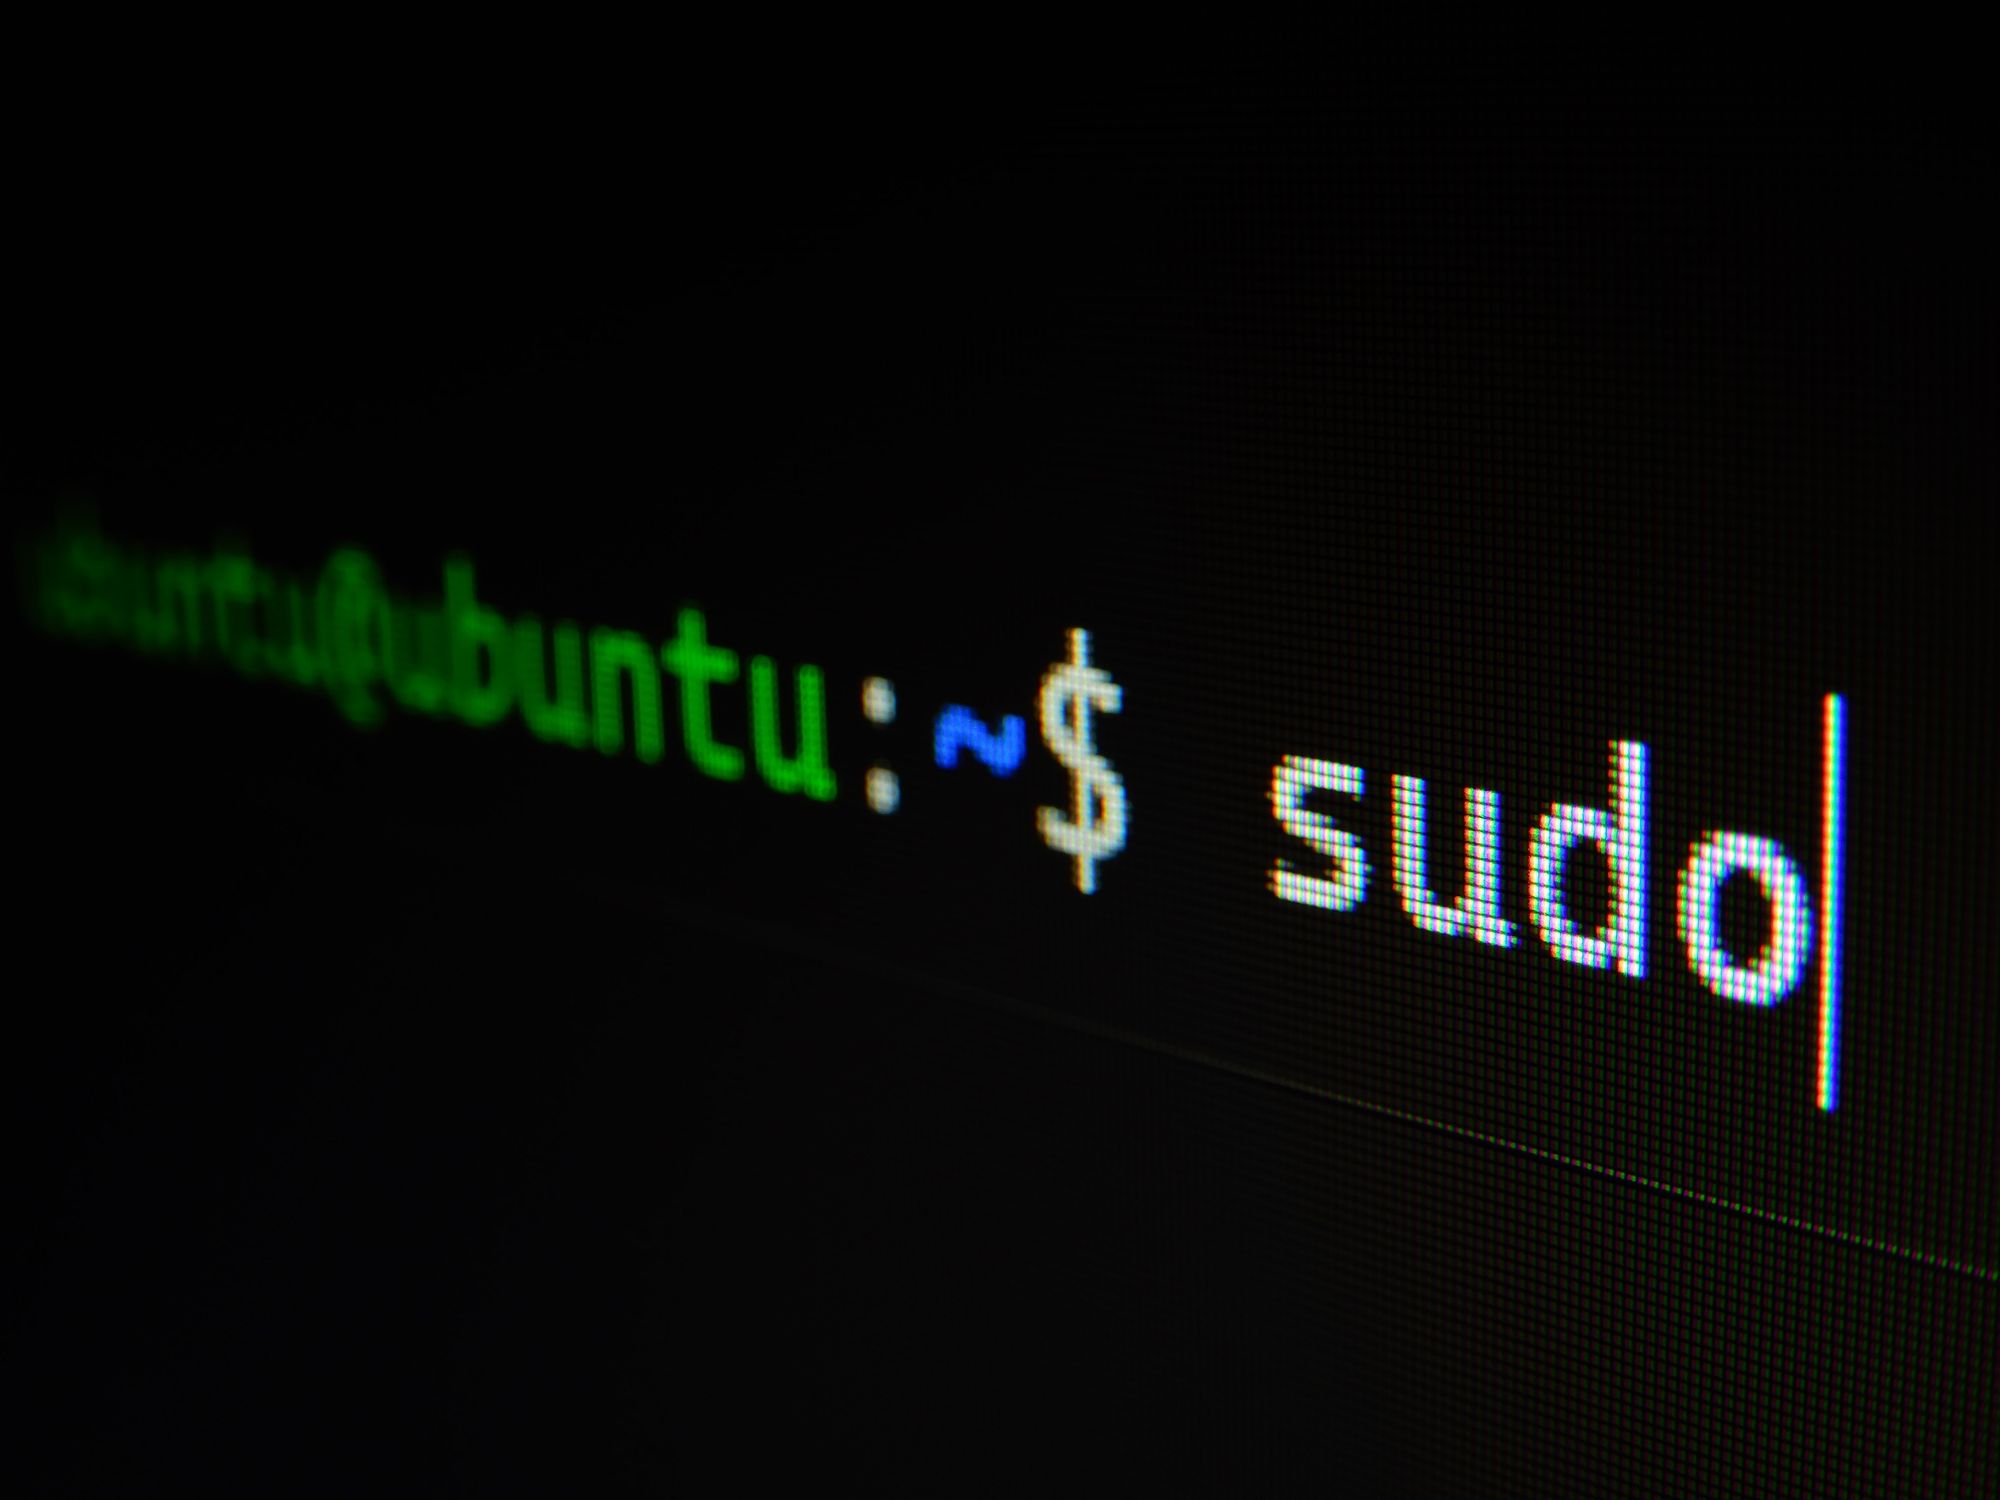 Close up of Terminal screen showing sudo command.